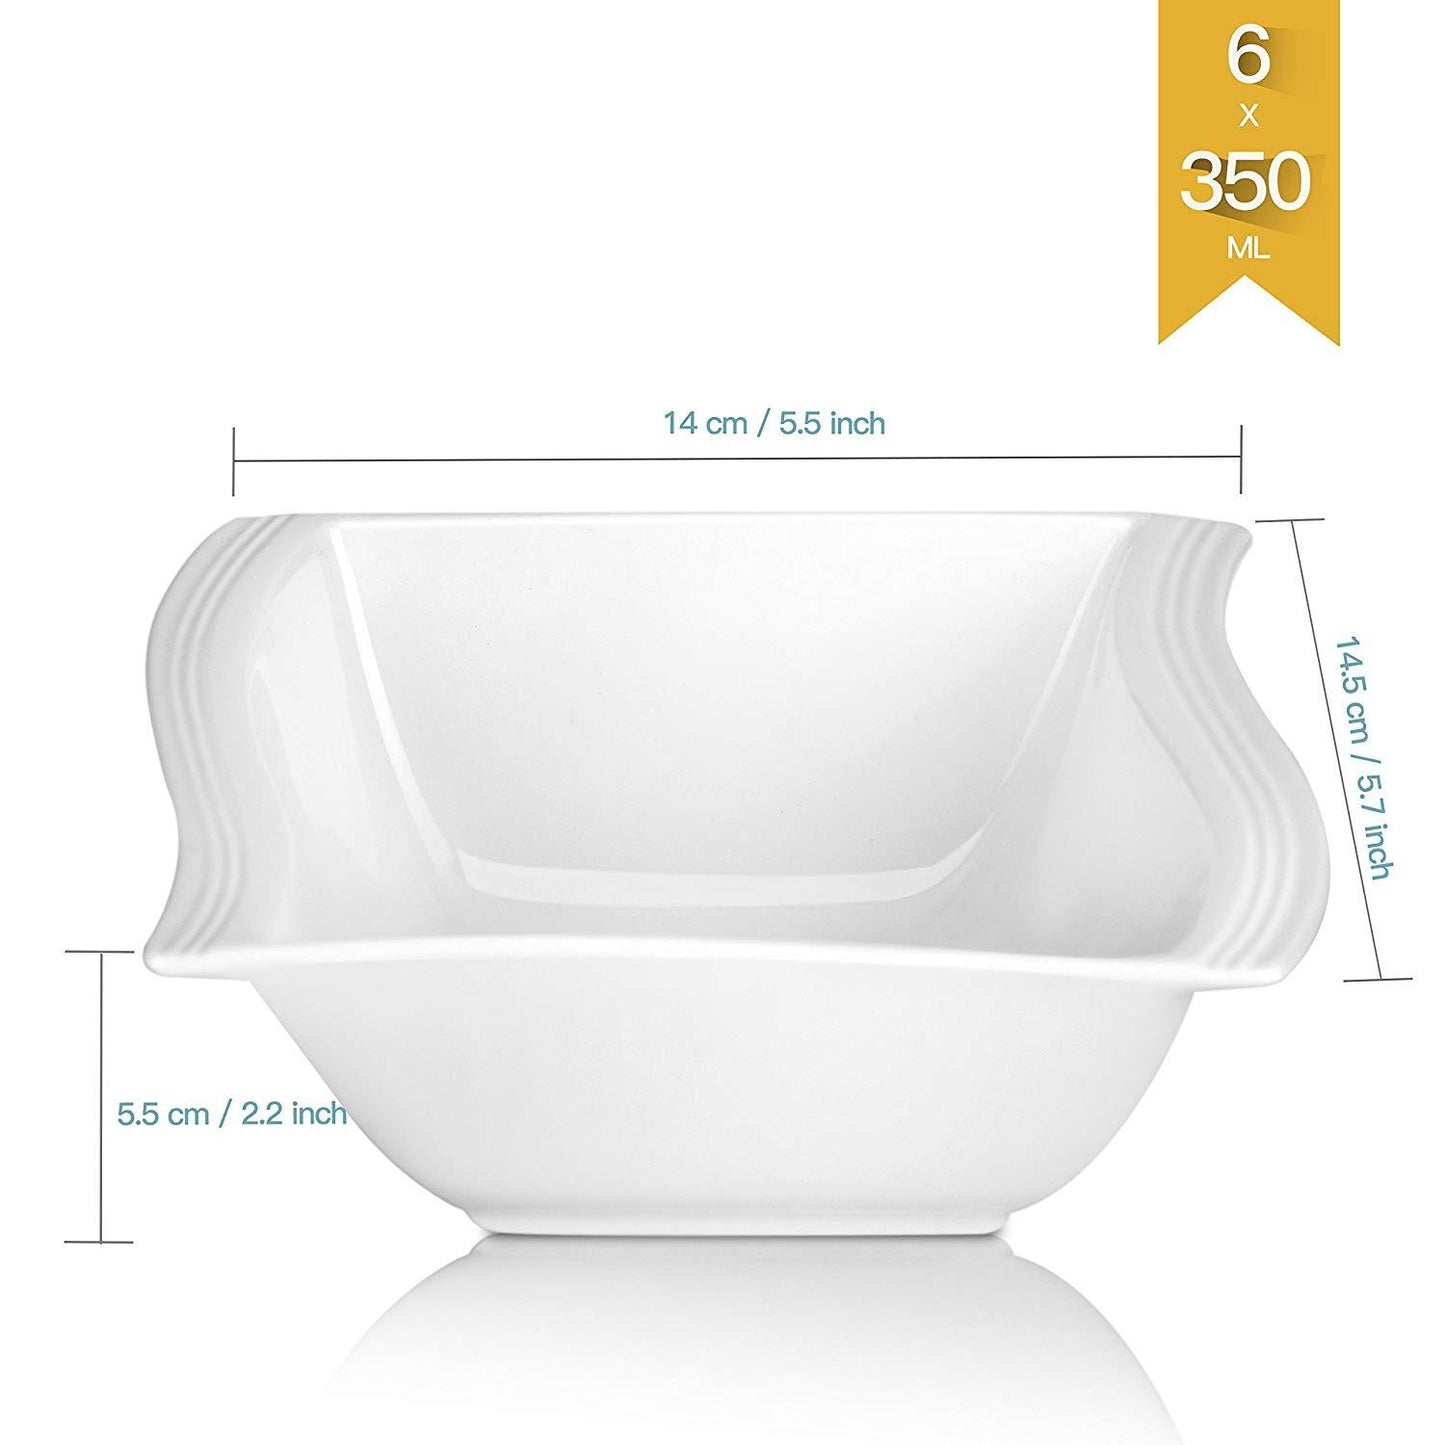 6-pieces 12 Ounce White Porcelain Square Soup Bowls - Nordic Side - 12, Bowl, Bowls, Breakfast, Cereal, Dinner, Dinnerware, Household, MALACASA, Oatmeal, Ounce, pieces, Porcelain, Sets, Soup,